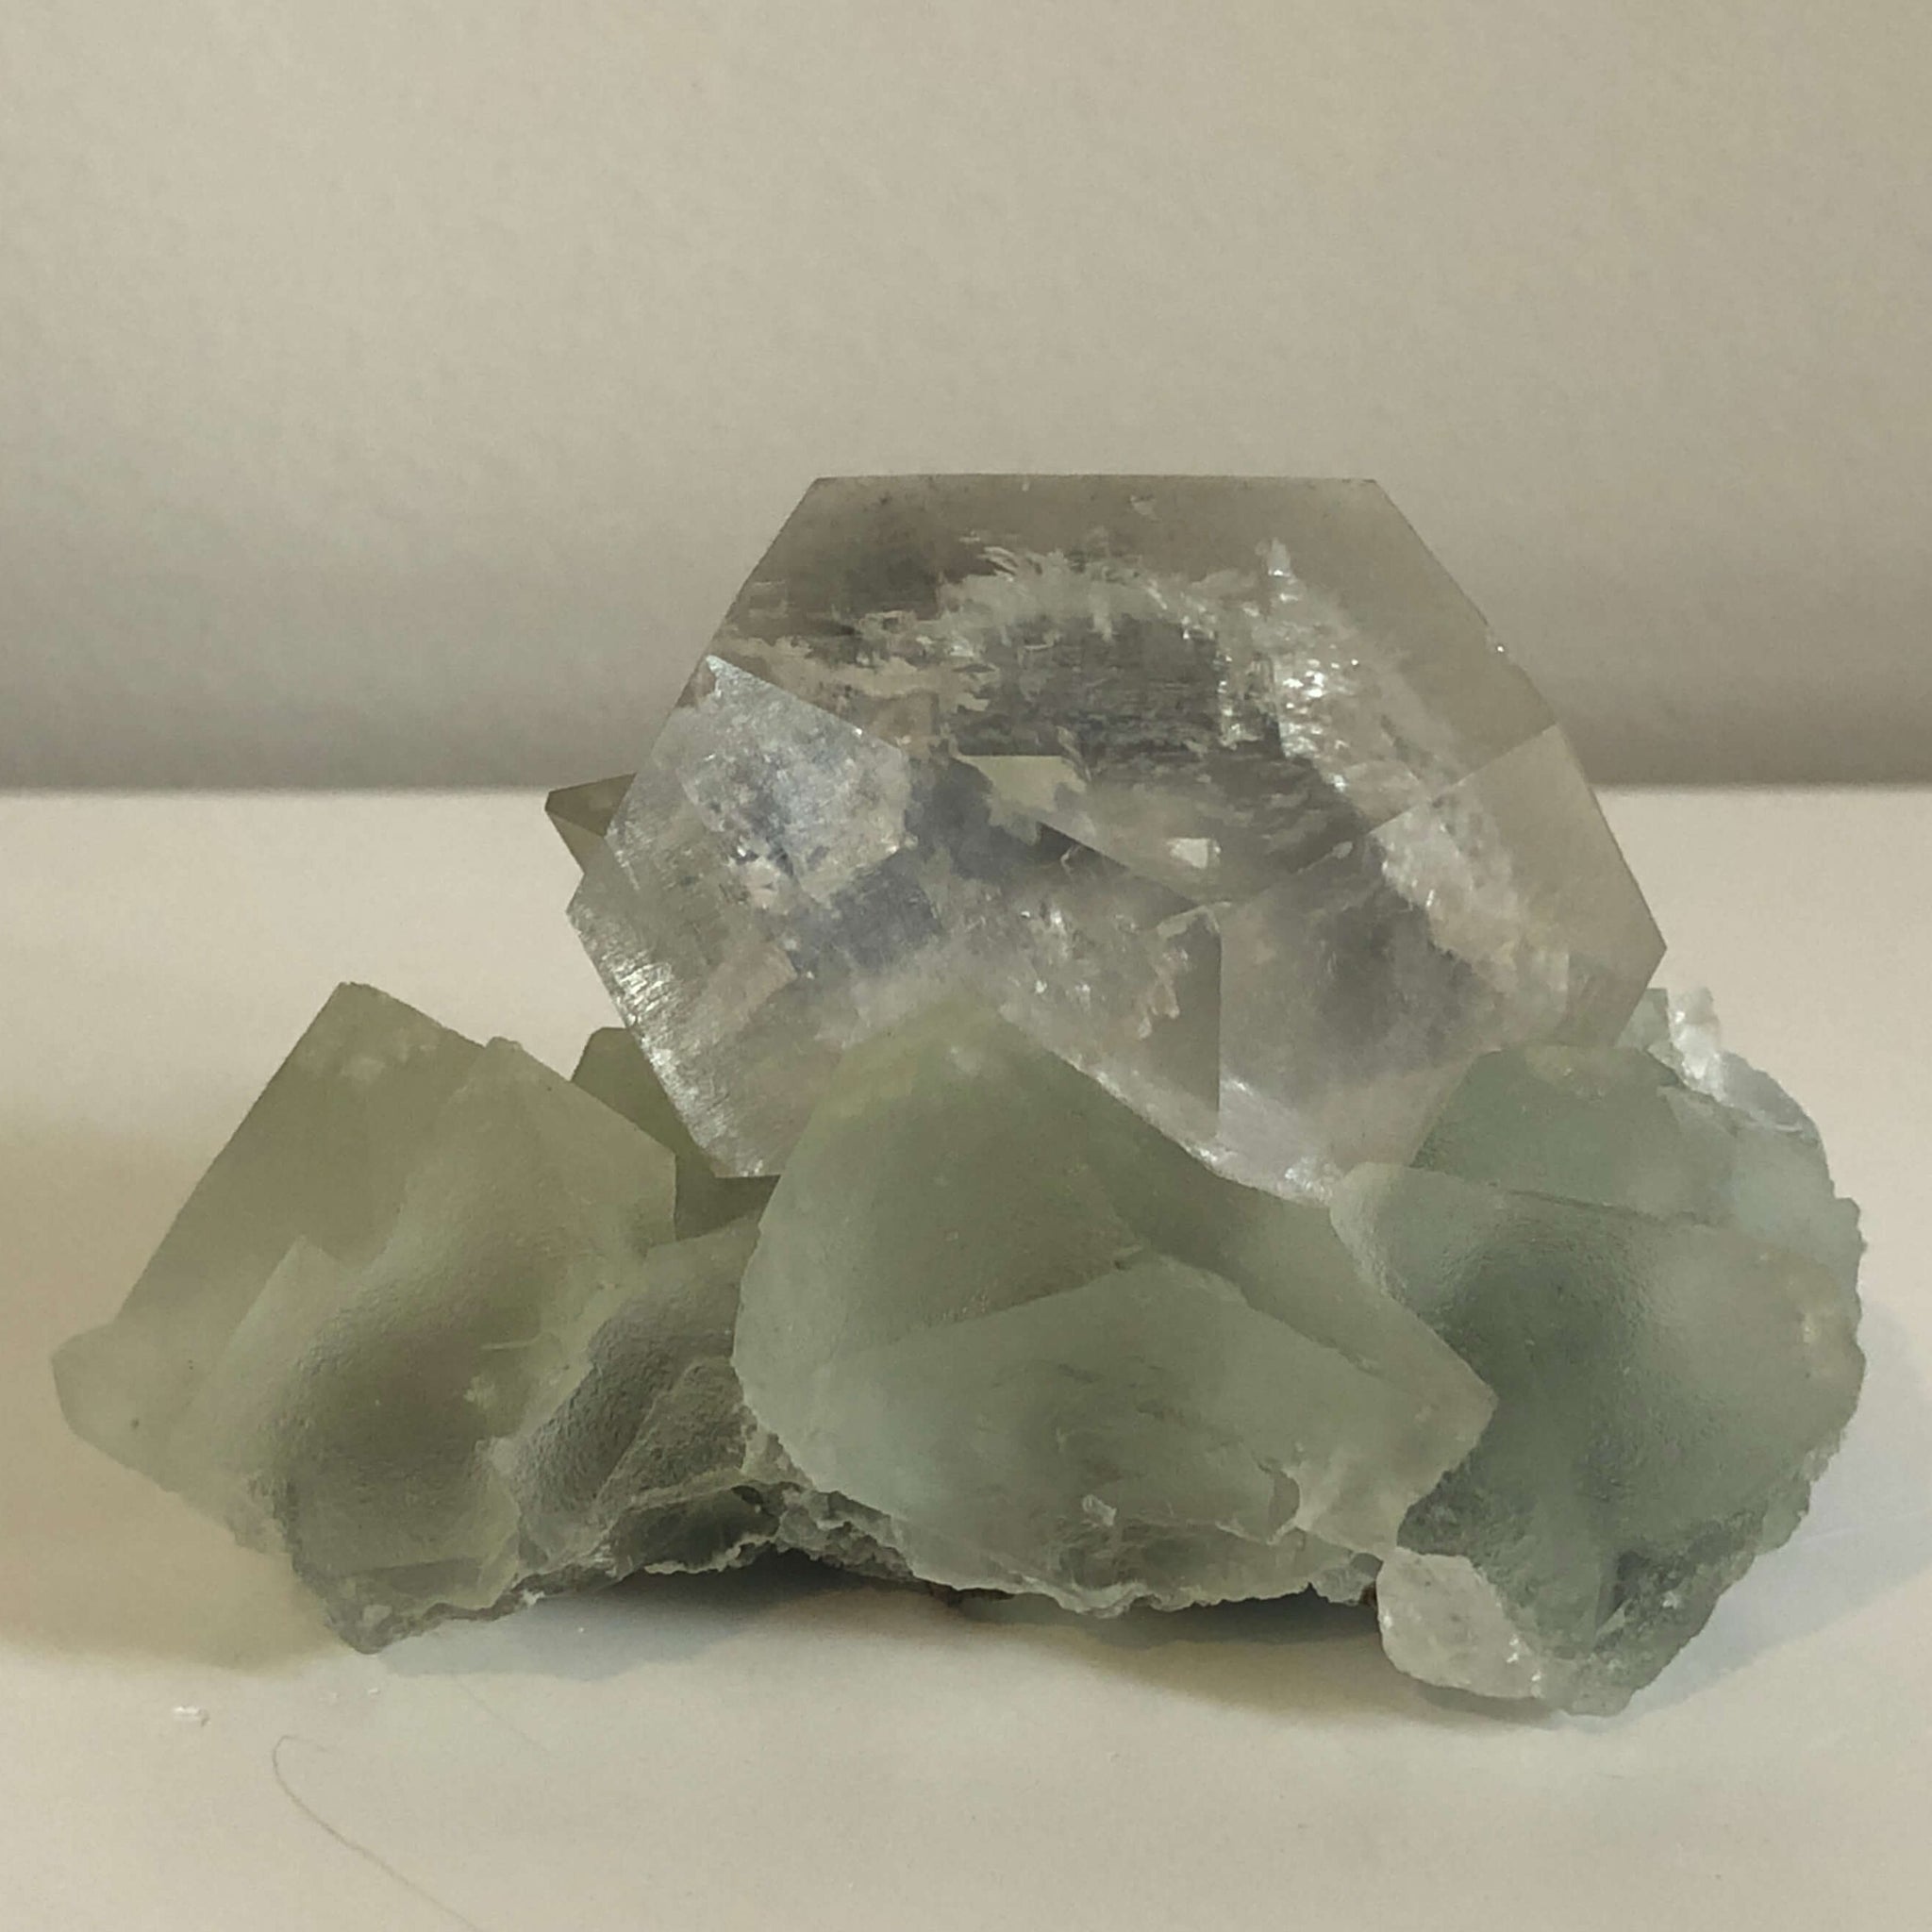 Calcite and Fluorite with Silver Mineral Inclusion - Collector's Item